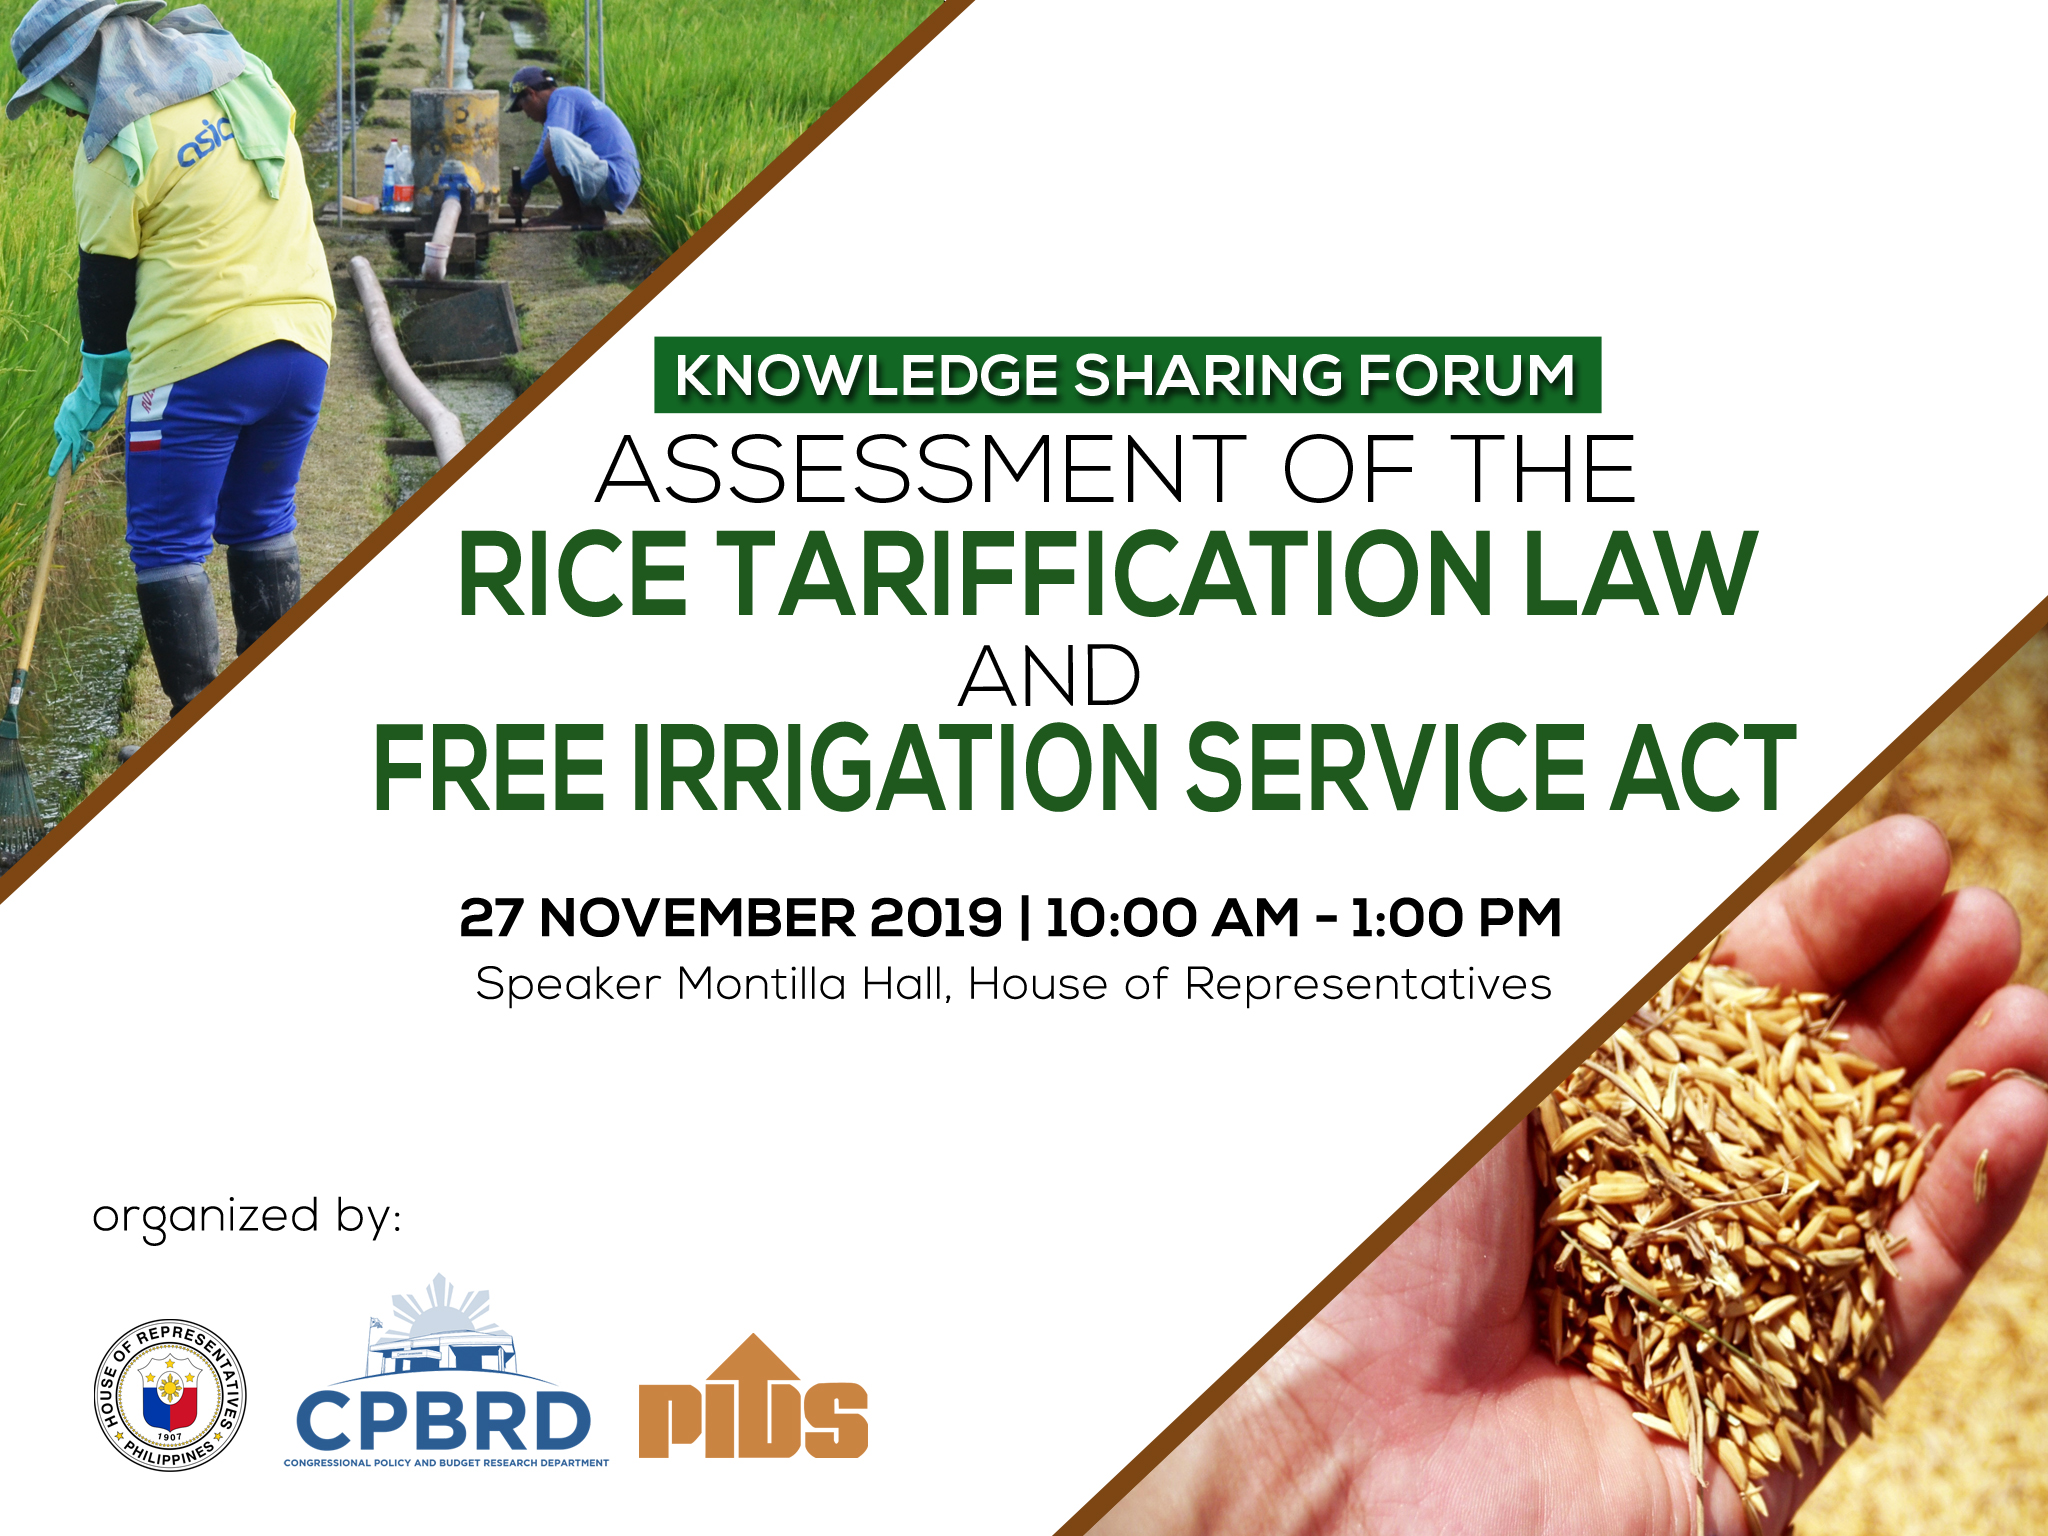 PIDS-CPBRD Knowledge Sharing Forum on the Assessment of the Rice Tariffication Law (RA 11203) and Free Irrigation Service Act (RA 10969)-backdrop-pids-cpbrd_forum-nov_27-final.jpg